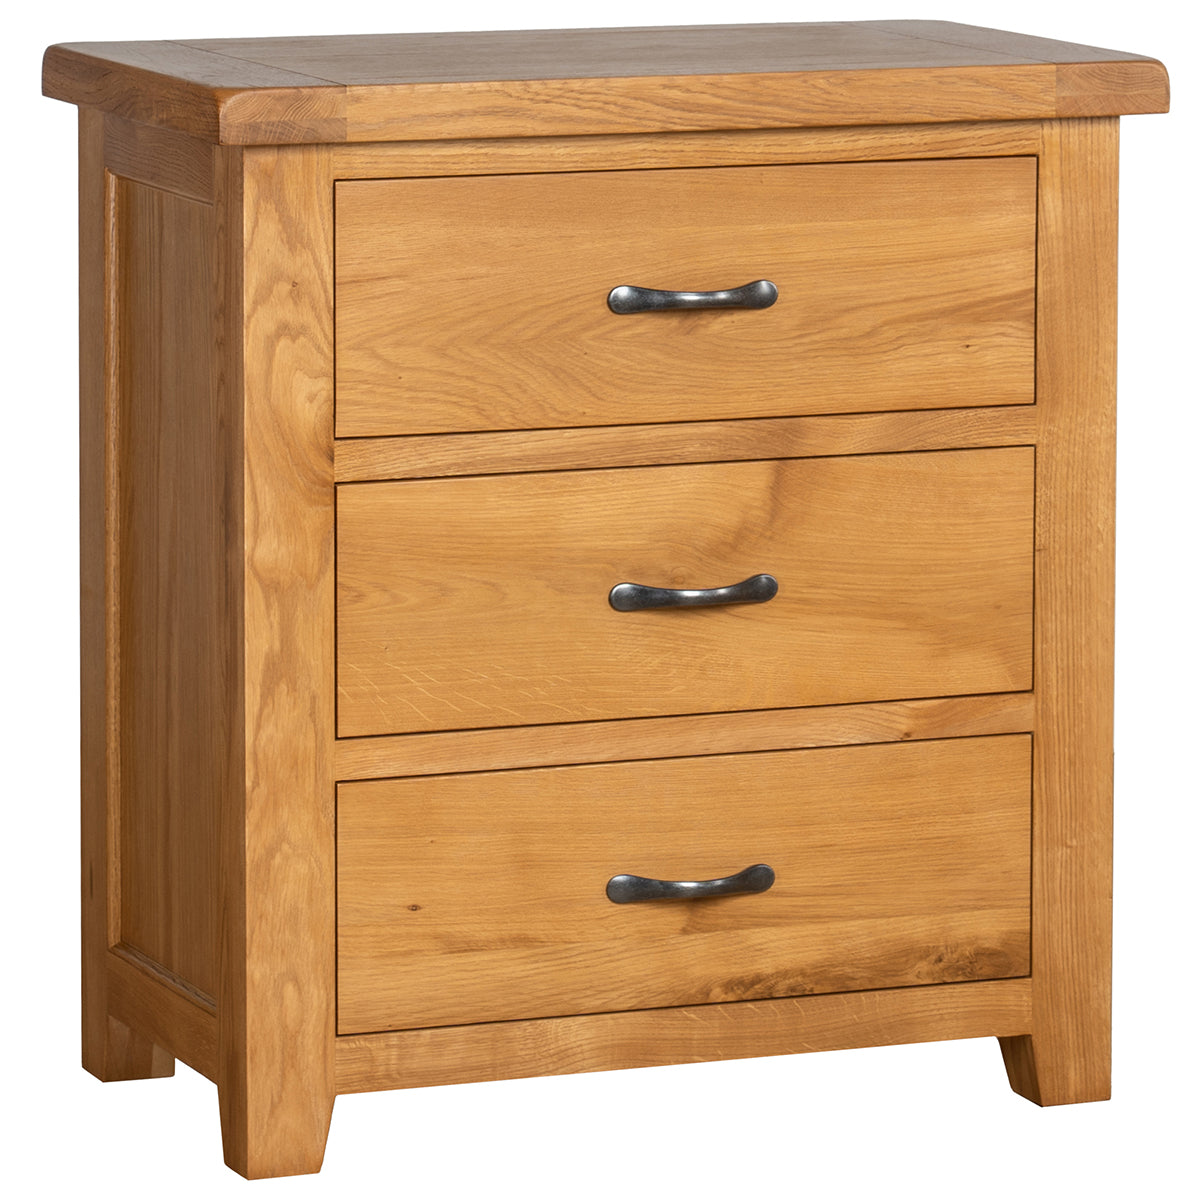 a wooden dresser with a wooden dresser on top of it 